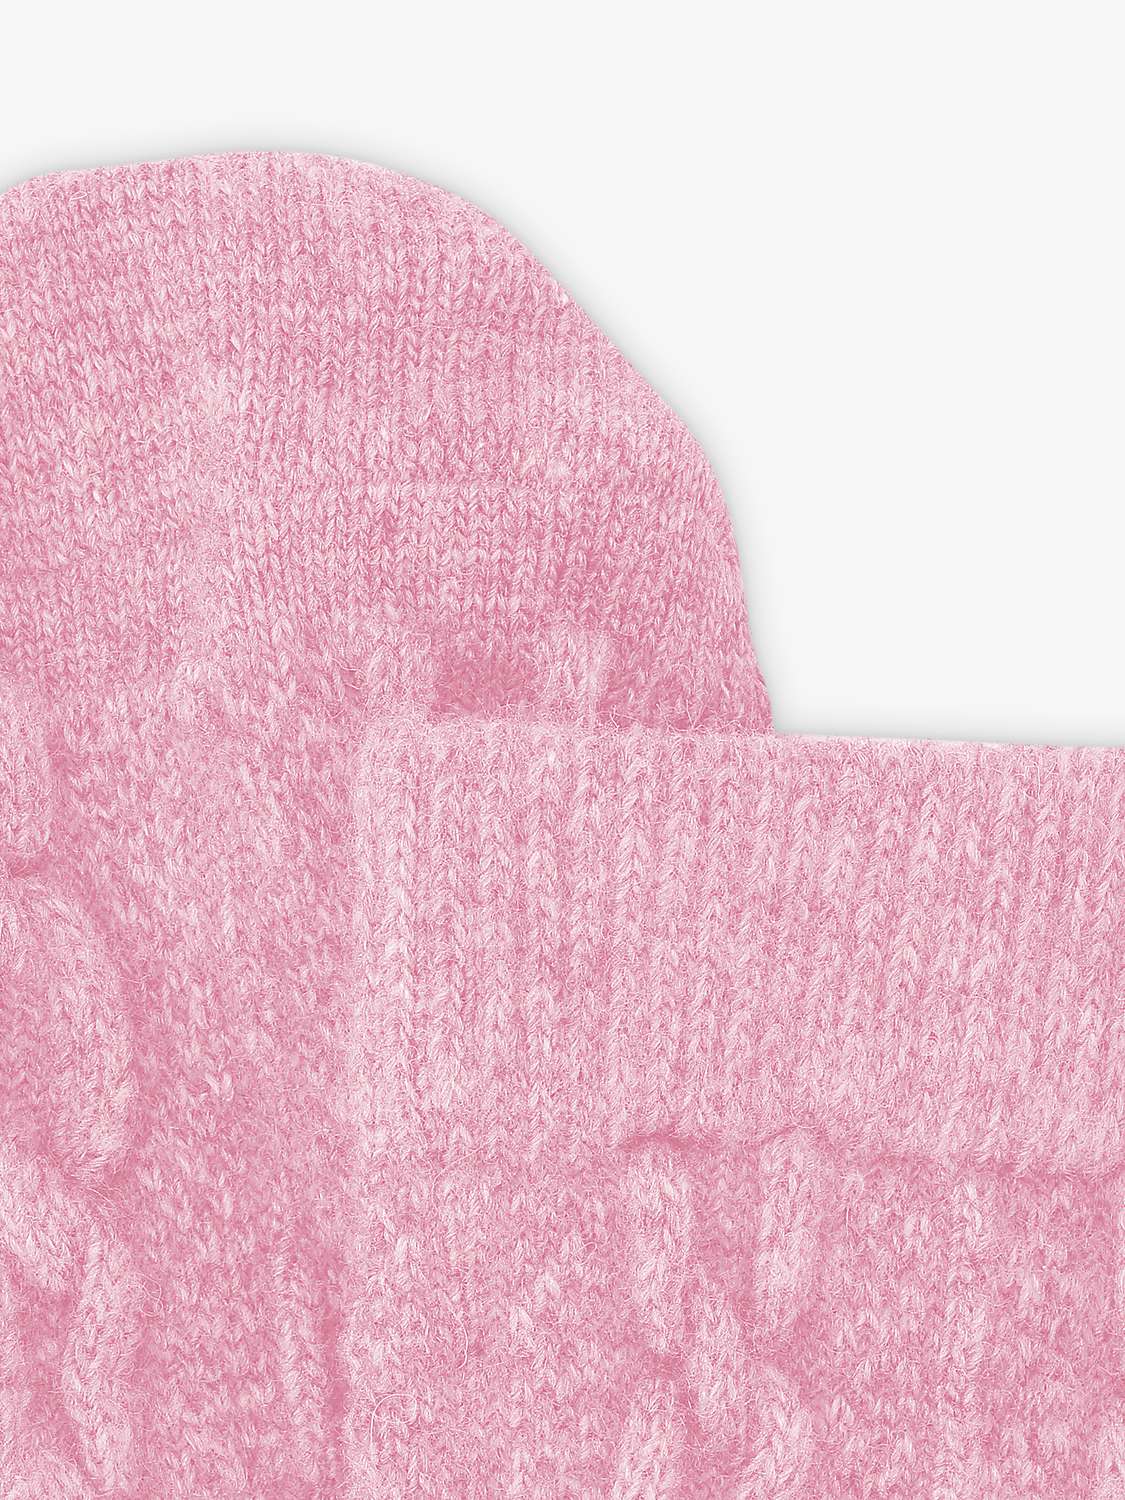 Buy Dear Denier Saga Recycled Wool Cashmere Cable Knit Socks Online at johnlewis.com